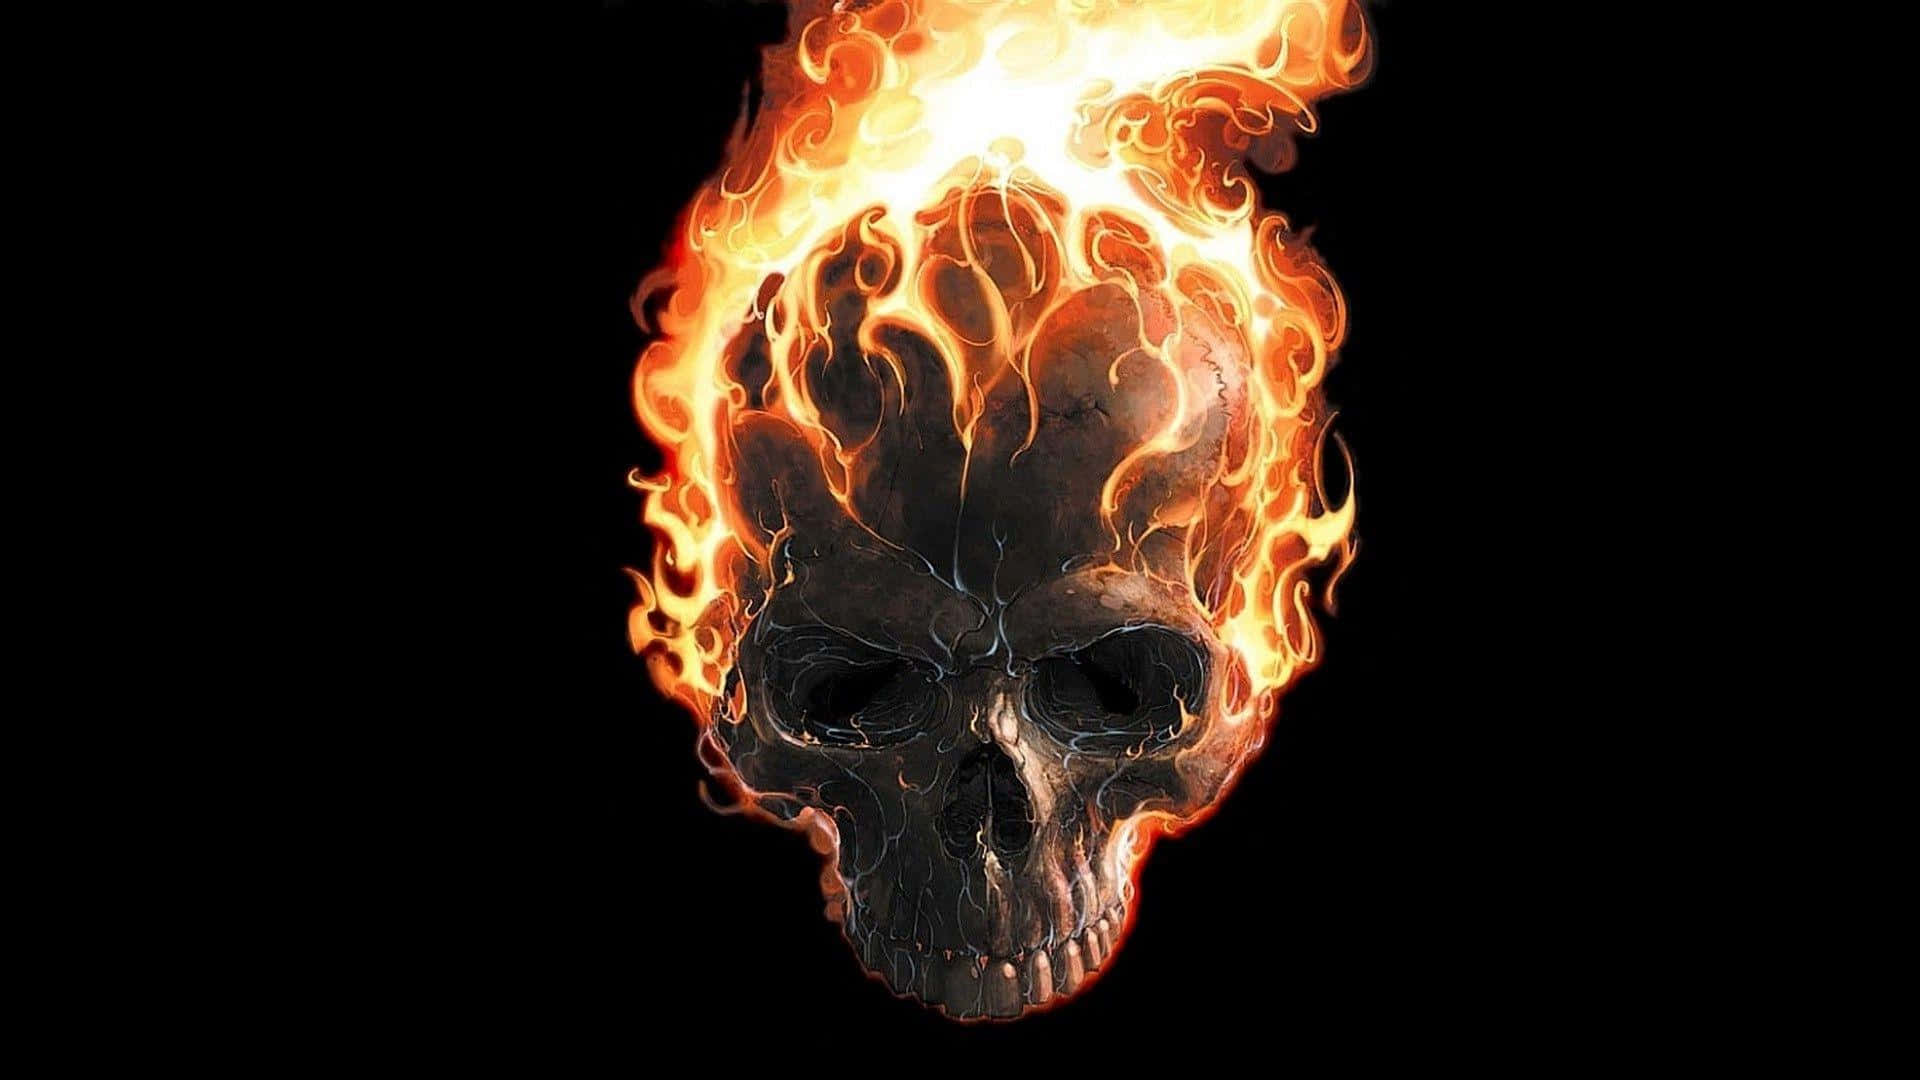 A Skull With Flames On It